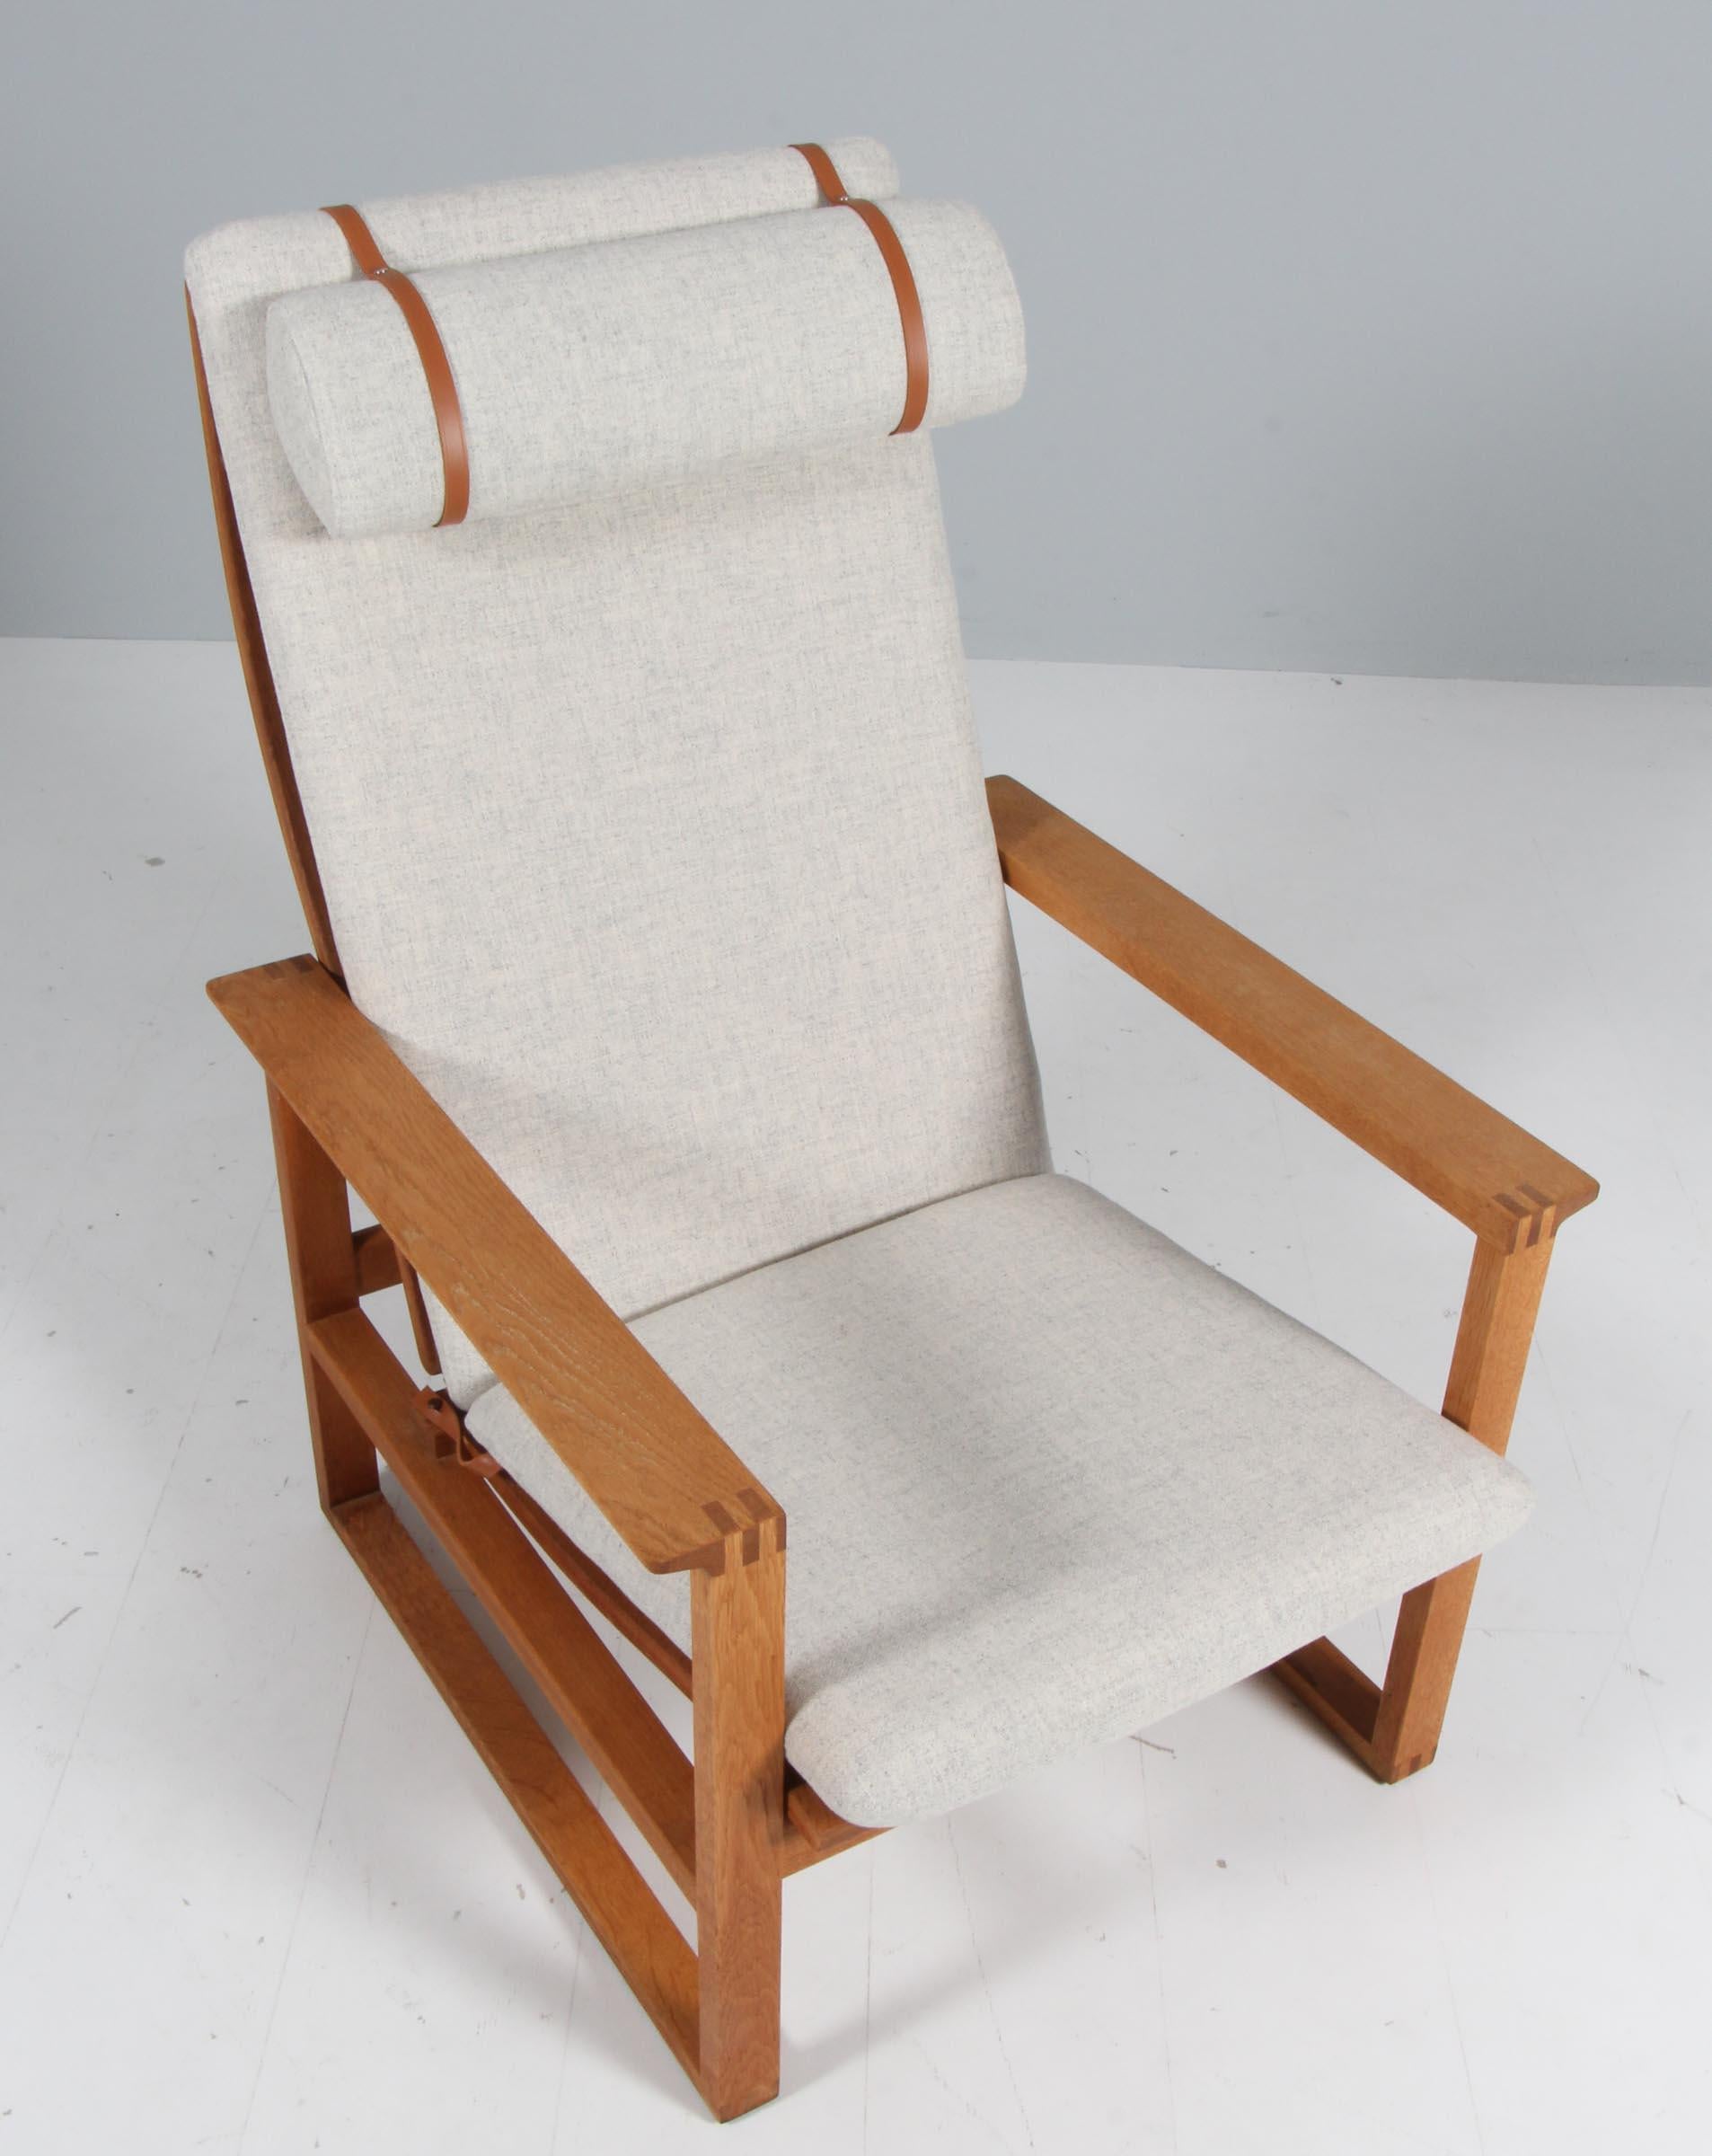 A Børge Mogensen lounge chairs designed in 1956 model number 2254 for Fredericia Stolefabrik. Cubical frames made of solid oak with finger joints.

New upholstered with Tonus woll from Kvadrat. The seat cushion can be fixed with a leather strap